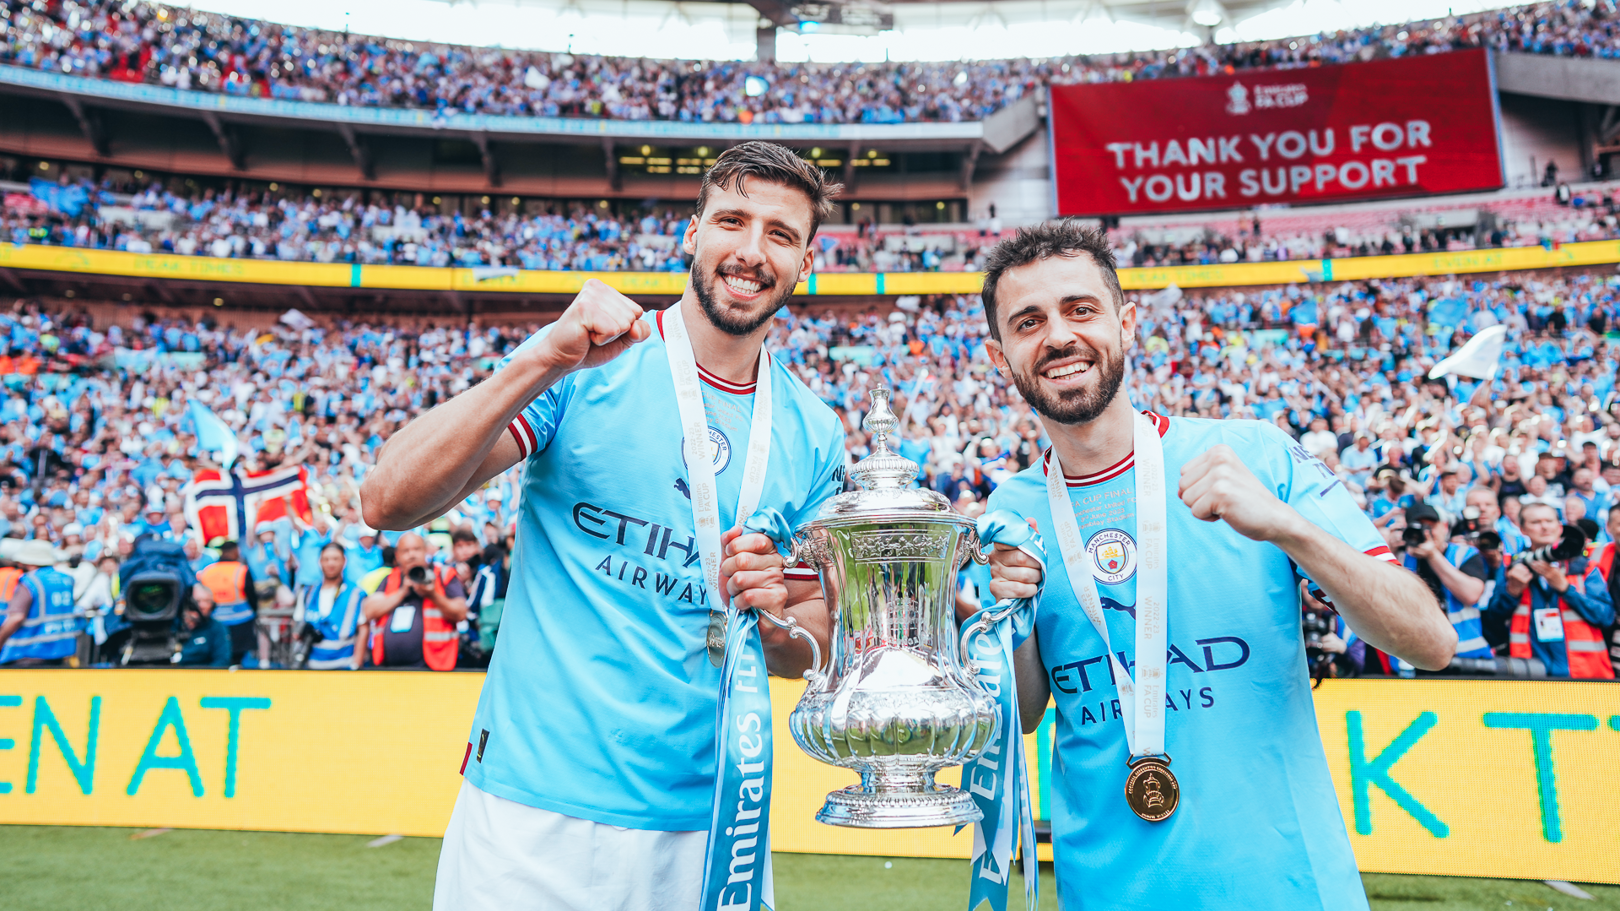 Bernardo's versatility makes him one of the best in the game, says Dias